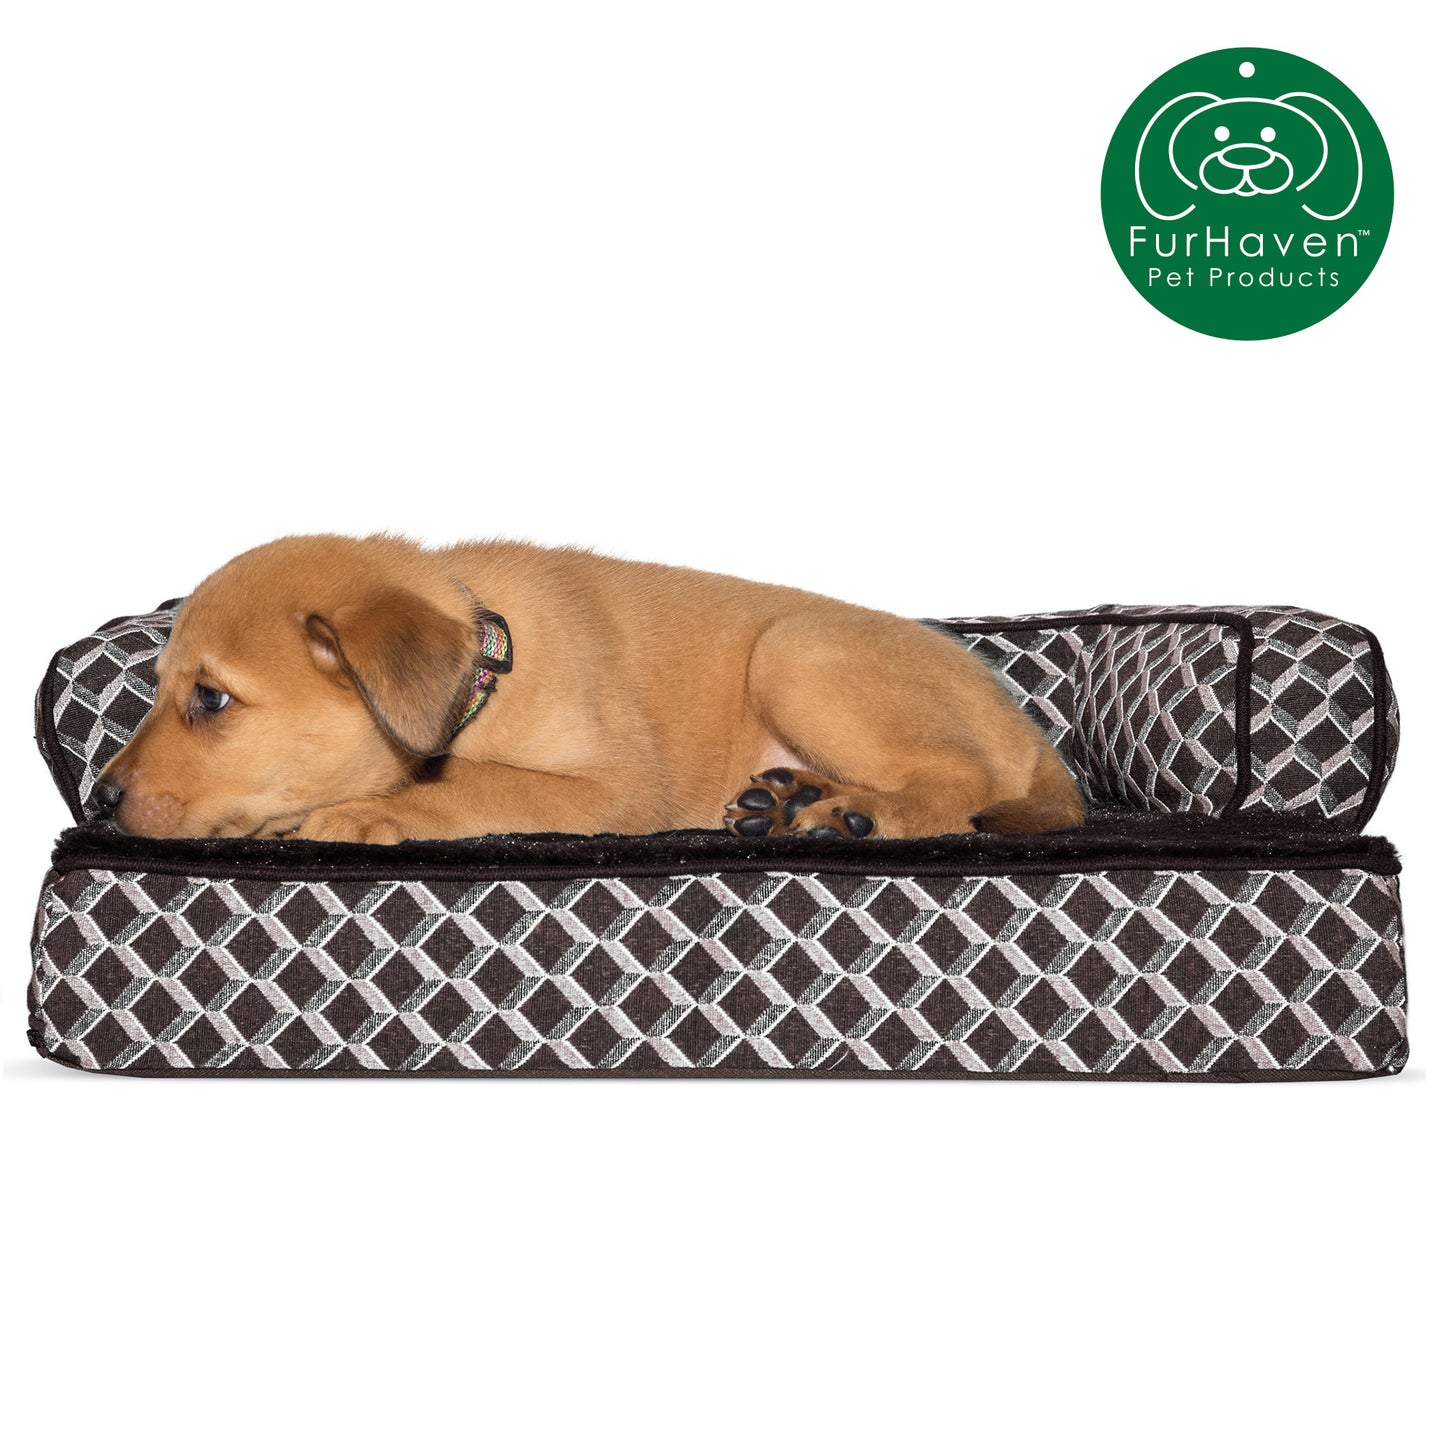 Plush & Patterned Comfy Couch Sofa-Style Pet Bed